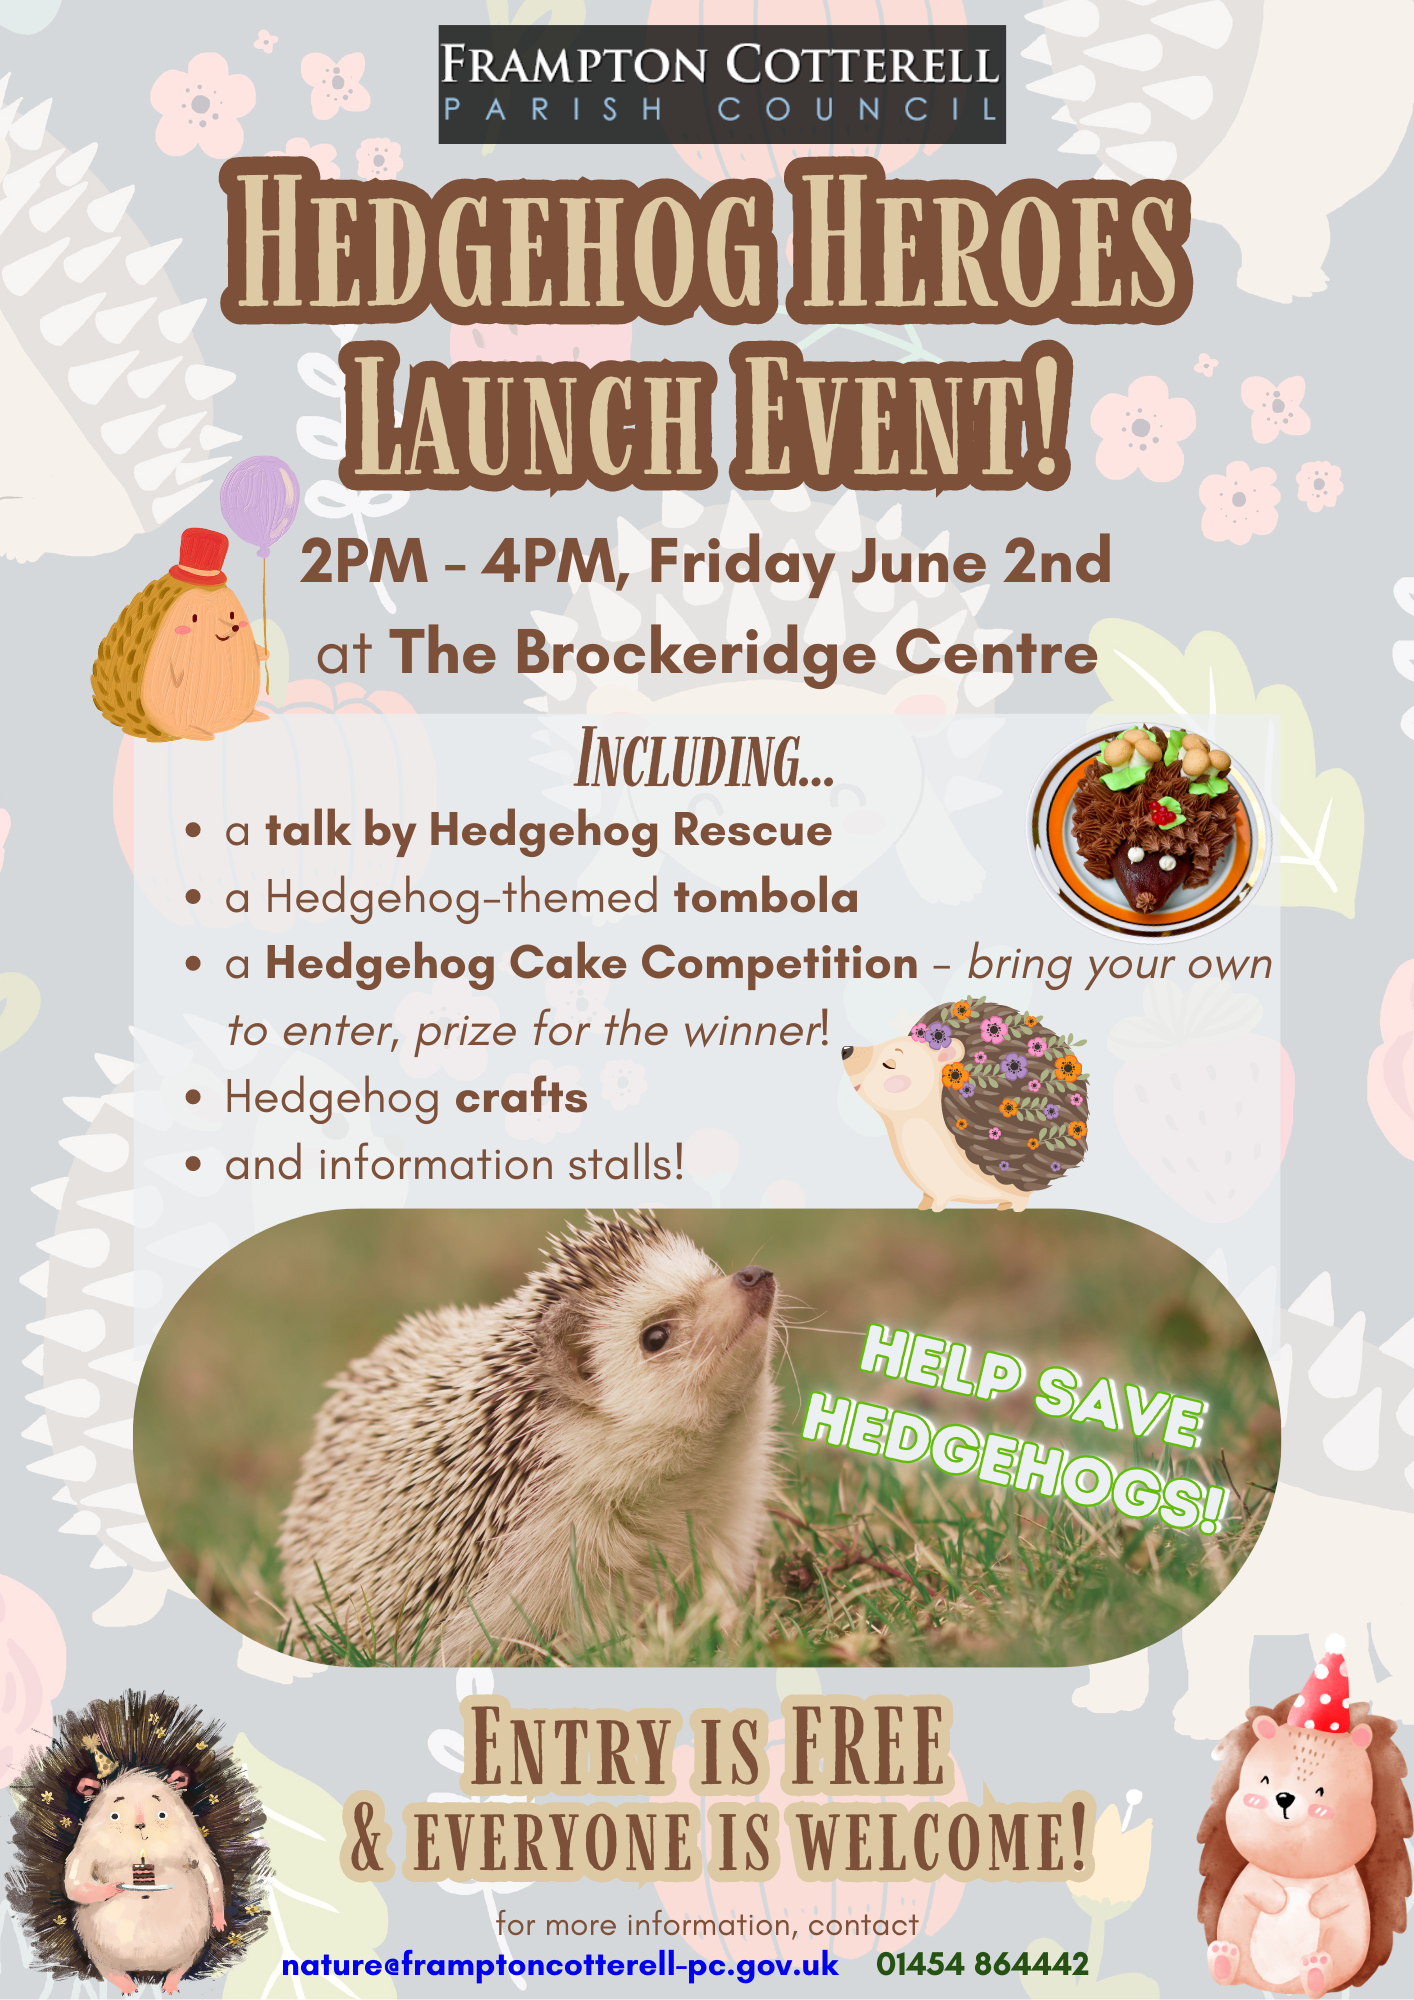 Frampton Cotterell Parish Council / Hedgehog Heroes Launch Event! / 2PM - 4PM, Friday June 2nd at The Brockeridge Centre / Including... a talk by Hedgehog Rescue; a hegehog-themed tombola; a hedgehog cake competition - bring your own to enter, prize for the winner!; hedgehog crafts; and information stalls! Help save hedgehogs! / Entry is Free & everyone is welcome / for more information, contact nature@framptoncotterell-pc.gov.uk or 01454 864442